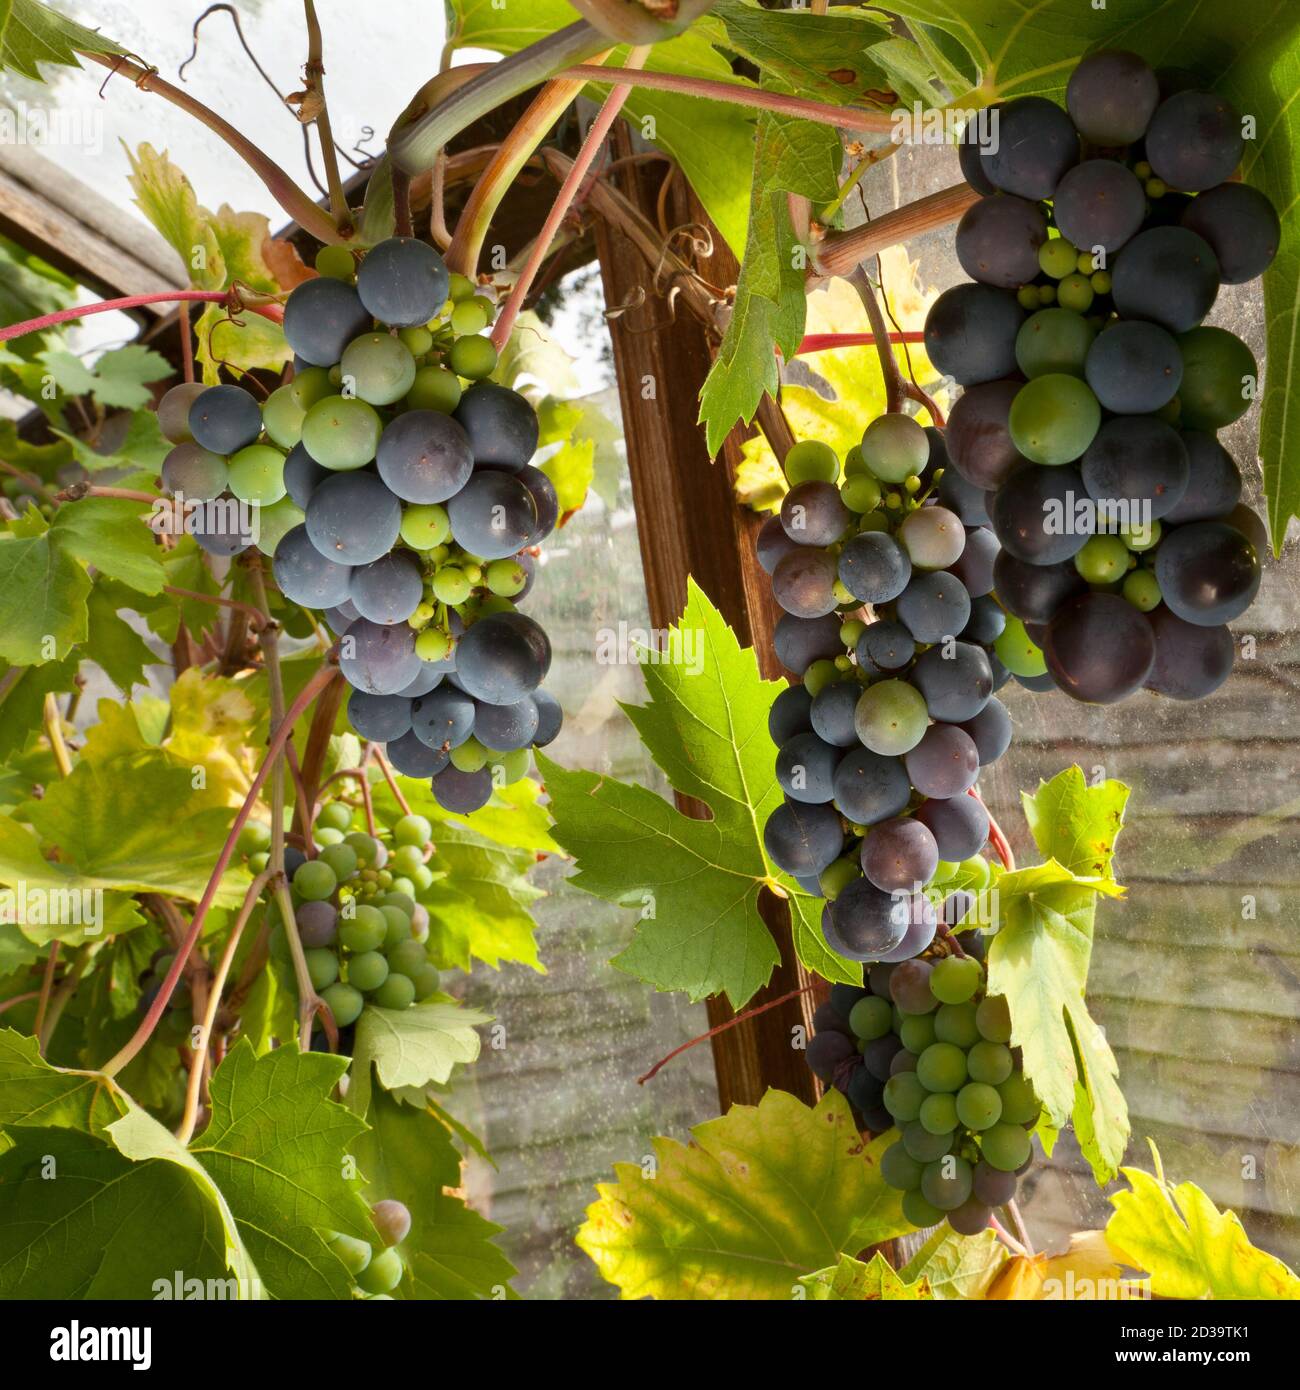 Bunches of grapes growing in a greenhouse UK Stock Photo